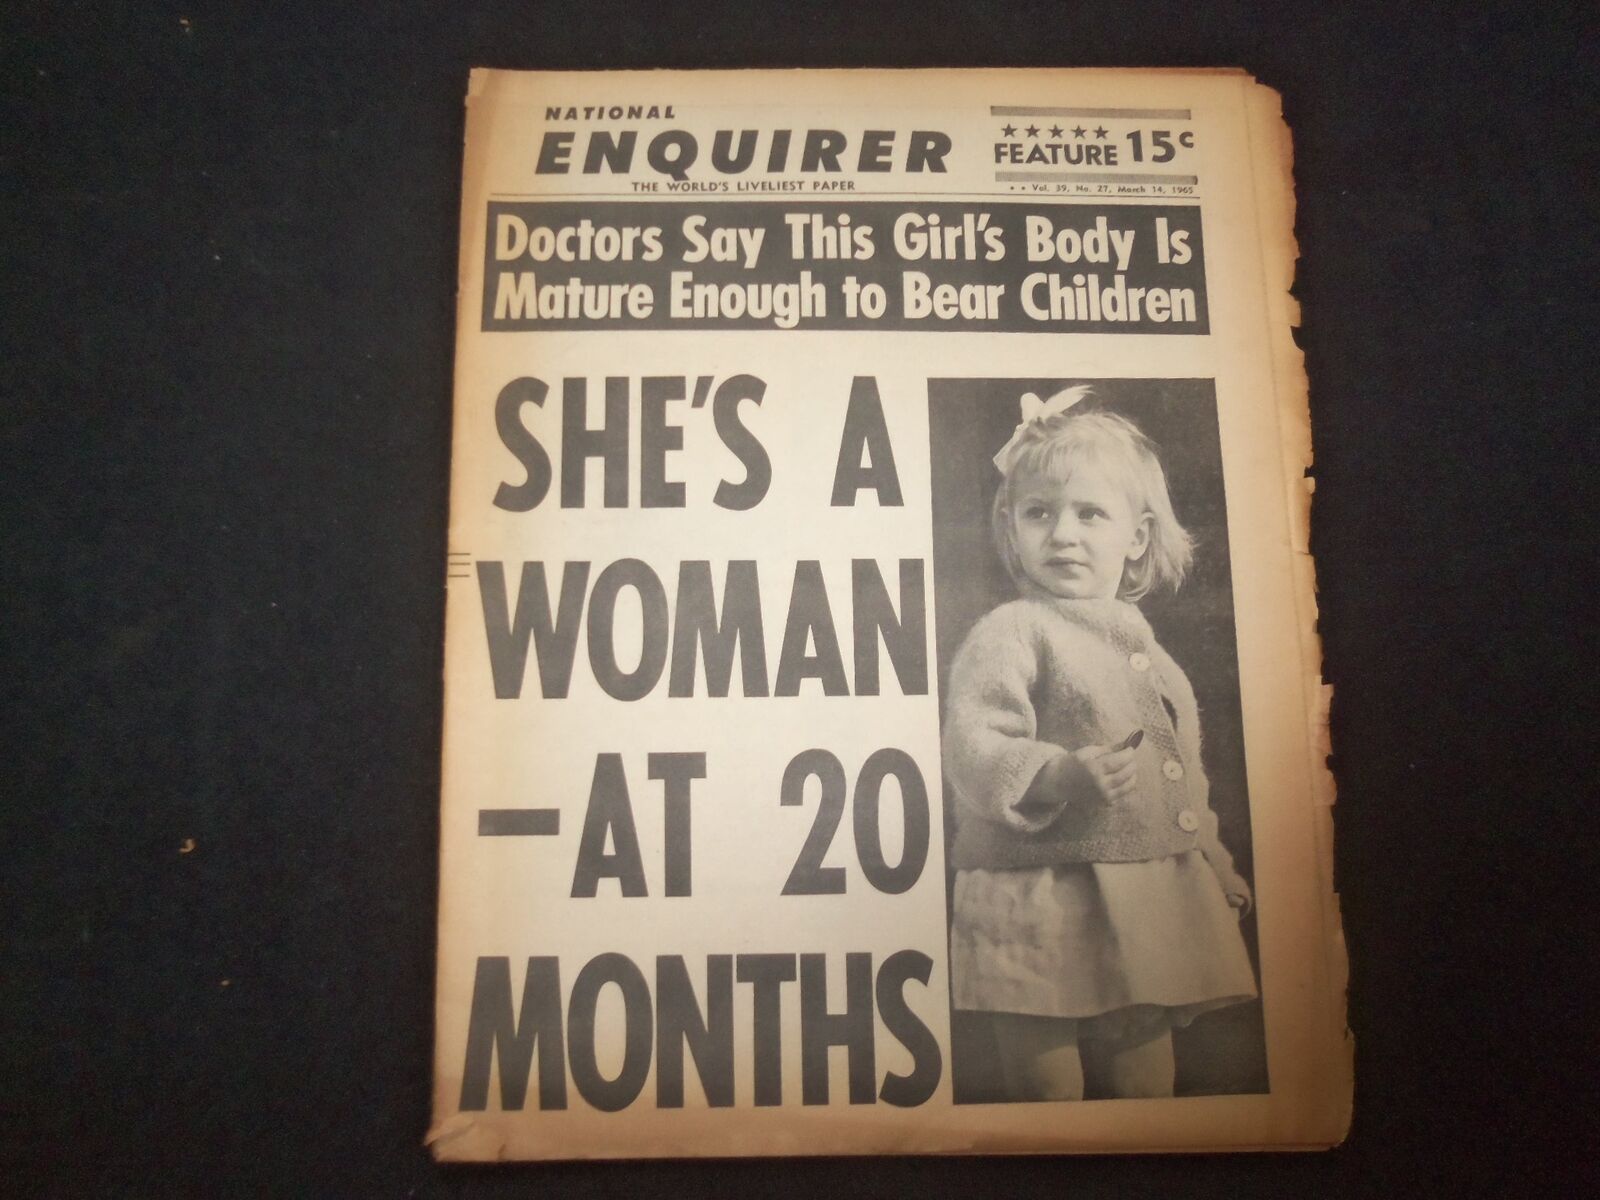 1965 MARCH 14 NATIONAL ENQUIRER NEWSPAPER - SHE'S A WOMAN AT 20 MONTHS - NP 7378